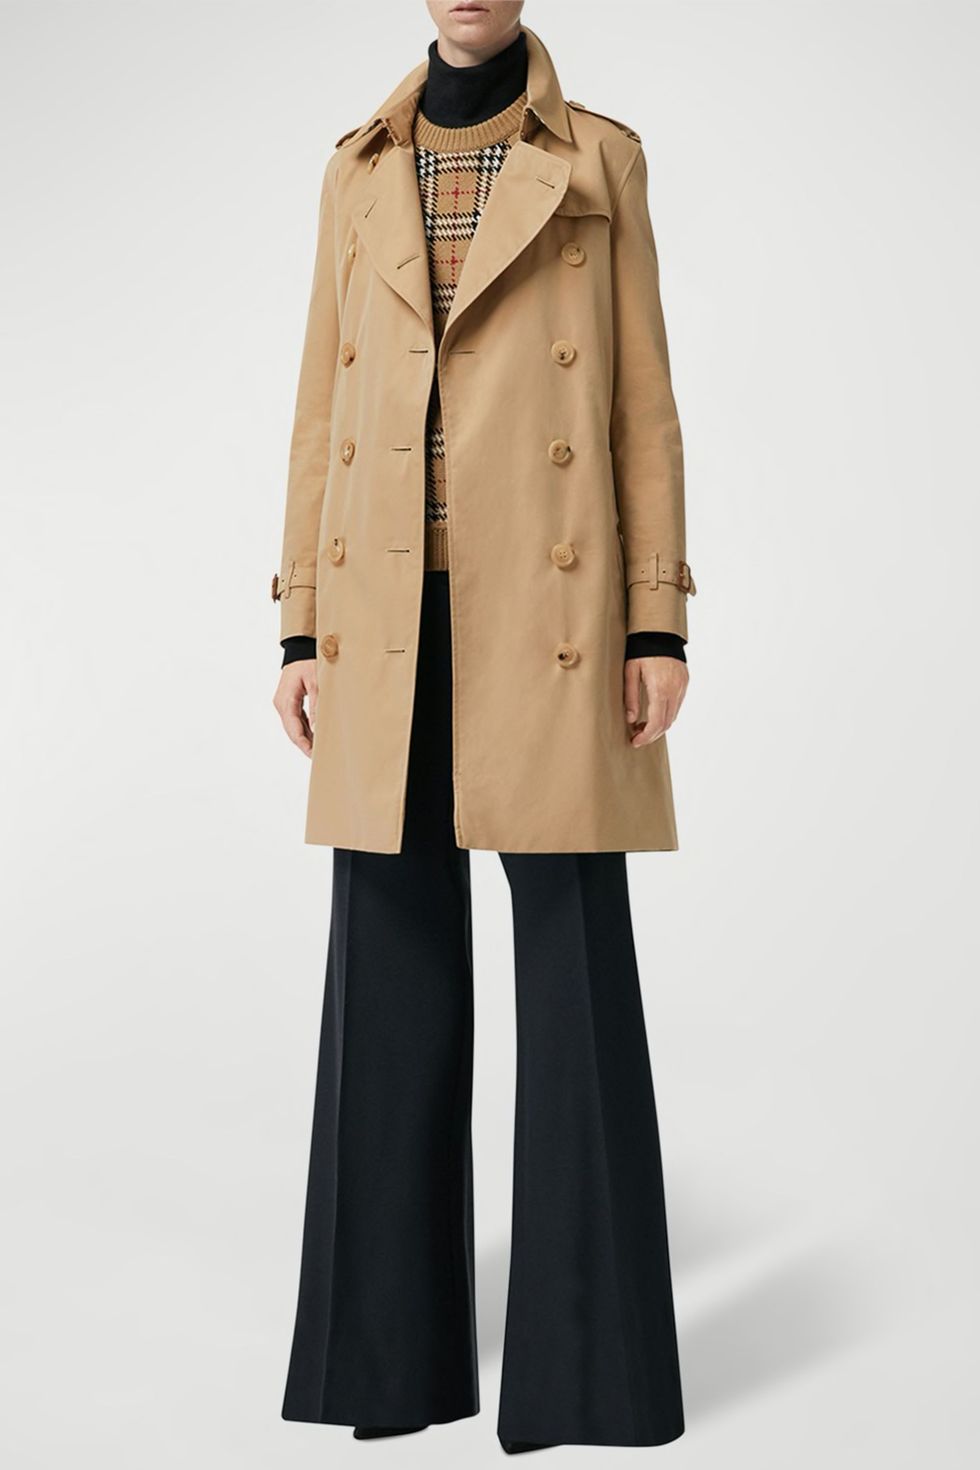 The 20 Best Trench Coats for Women That Will Outlast the Trend Cycle ...